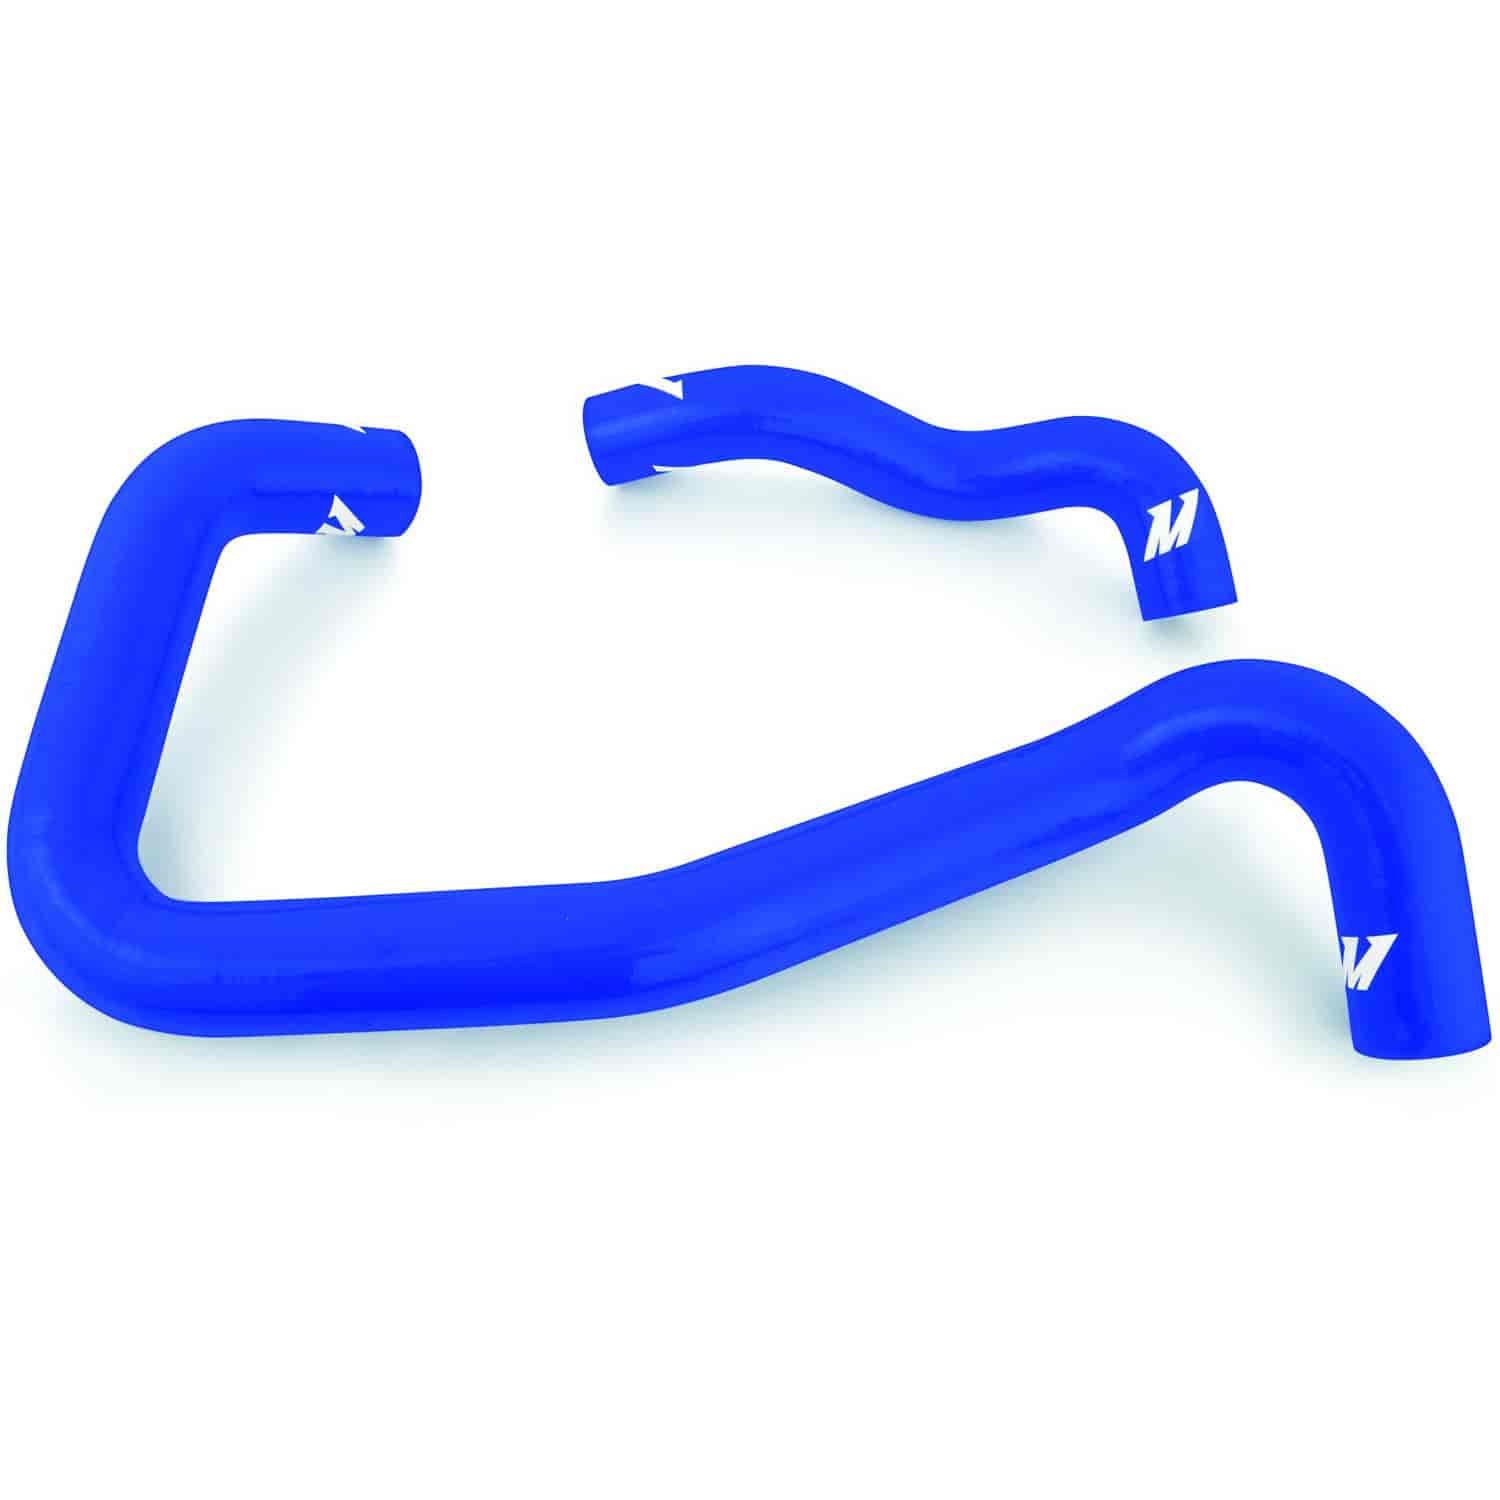 Silicone Radiator Hose Kit for 2005-2007 Ford 6.0L Powerstroke w/Mono Beam Chassis [Blue]